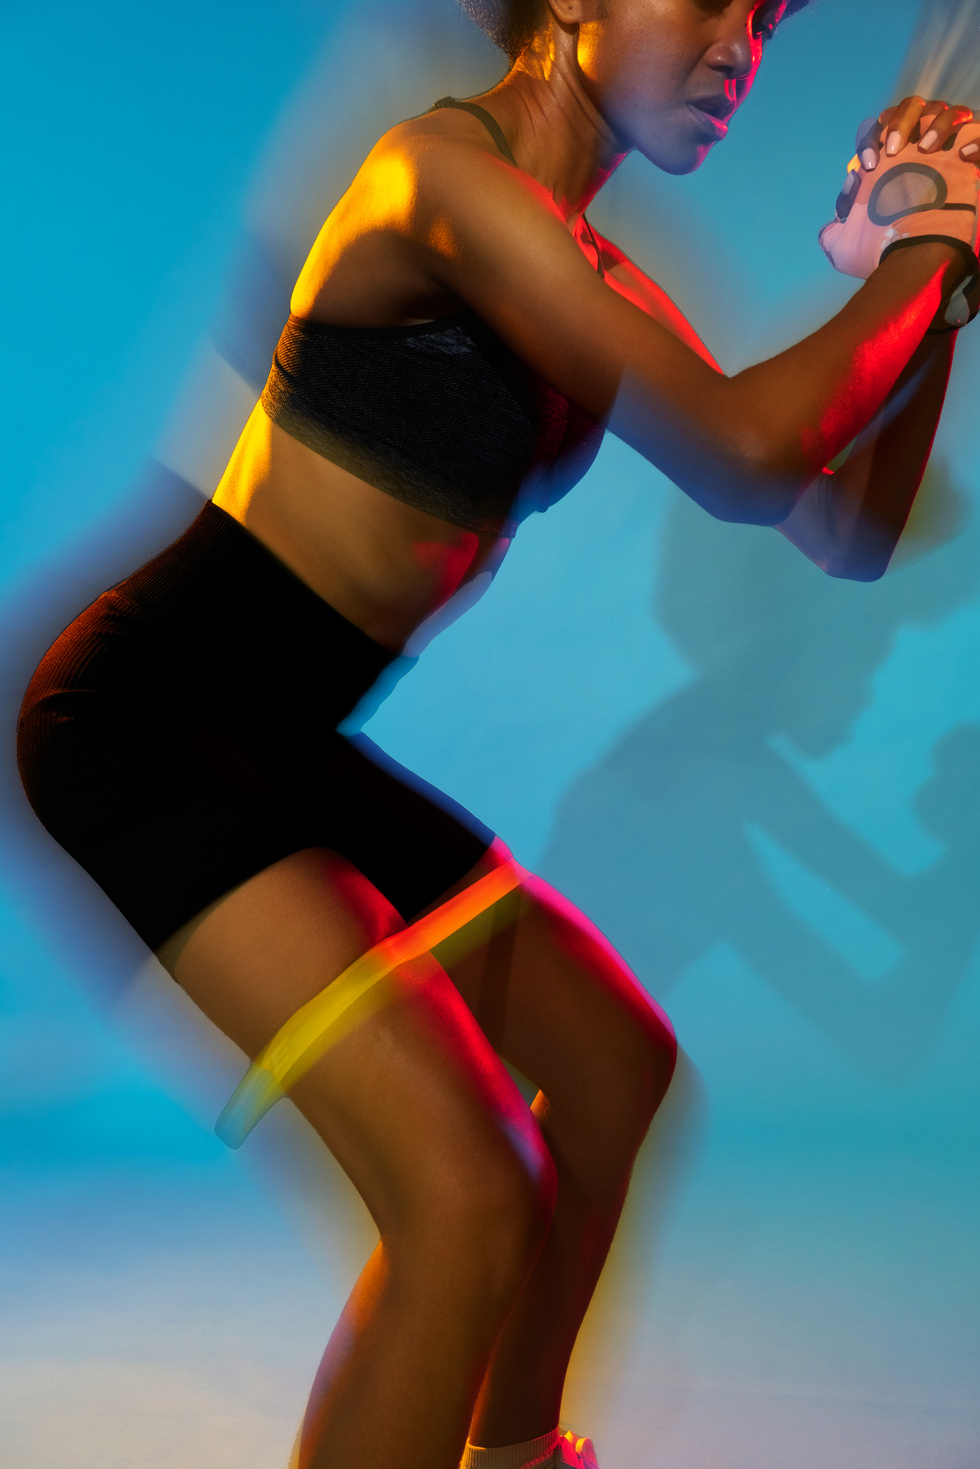 Portrait of a Woman Exercising with Resistance Bands